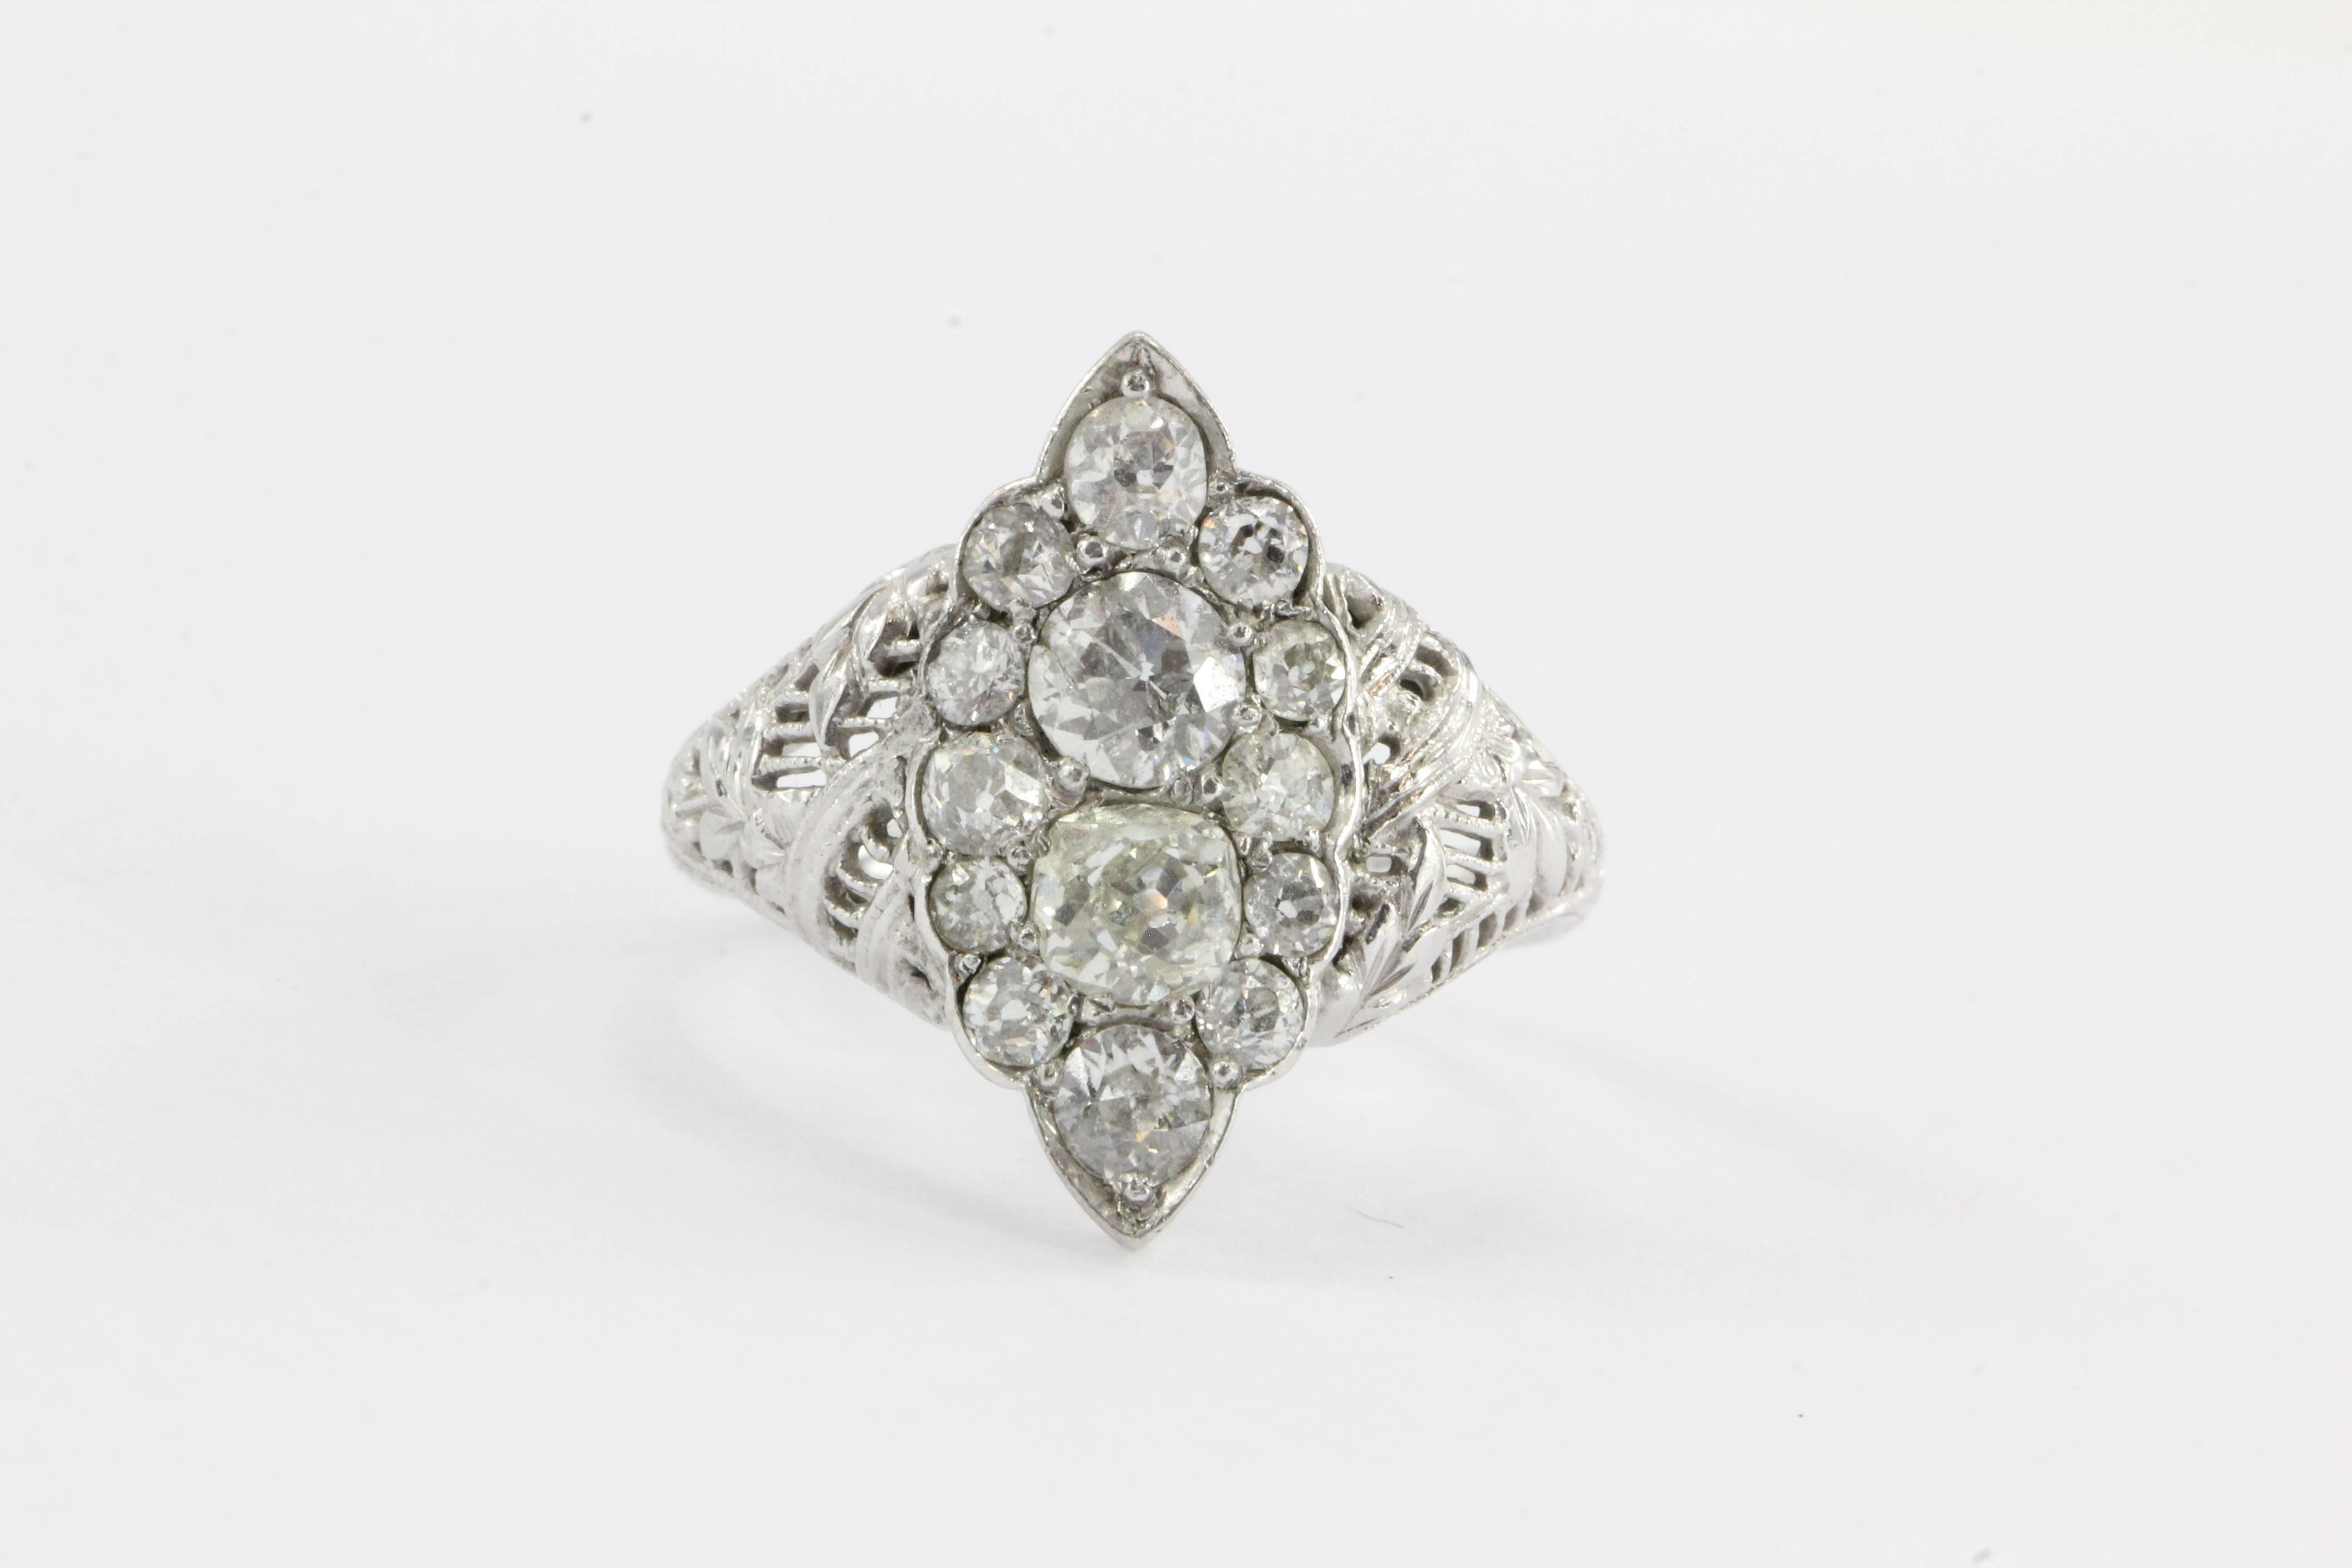 Art Deco 18K White Gold 1.5 CTW Old Mine Cut Diamond Navette Ring. The ring is in excellent estate condition and ready to wear. It is hallmarked 18K HOH. HOH is the makers mark but I am not sure who the maker is. The band design is an intricate